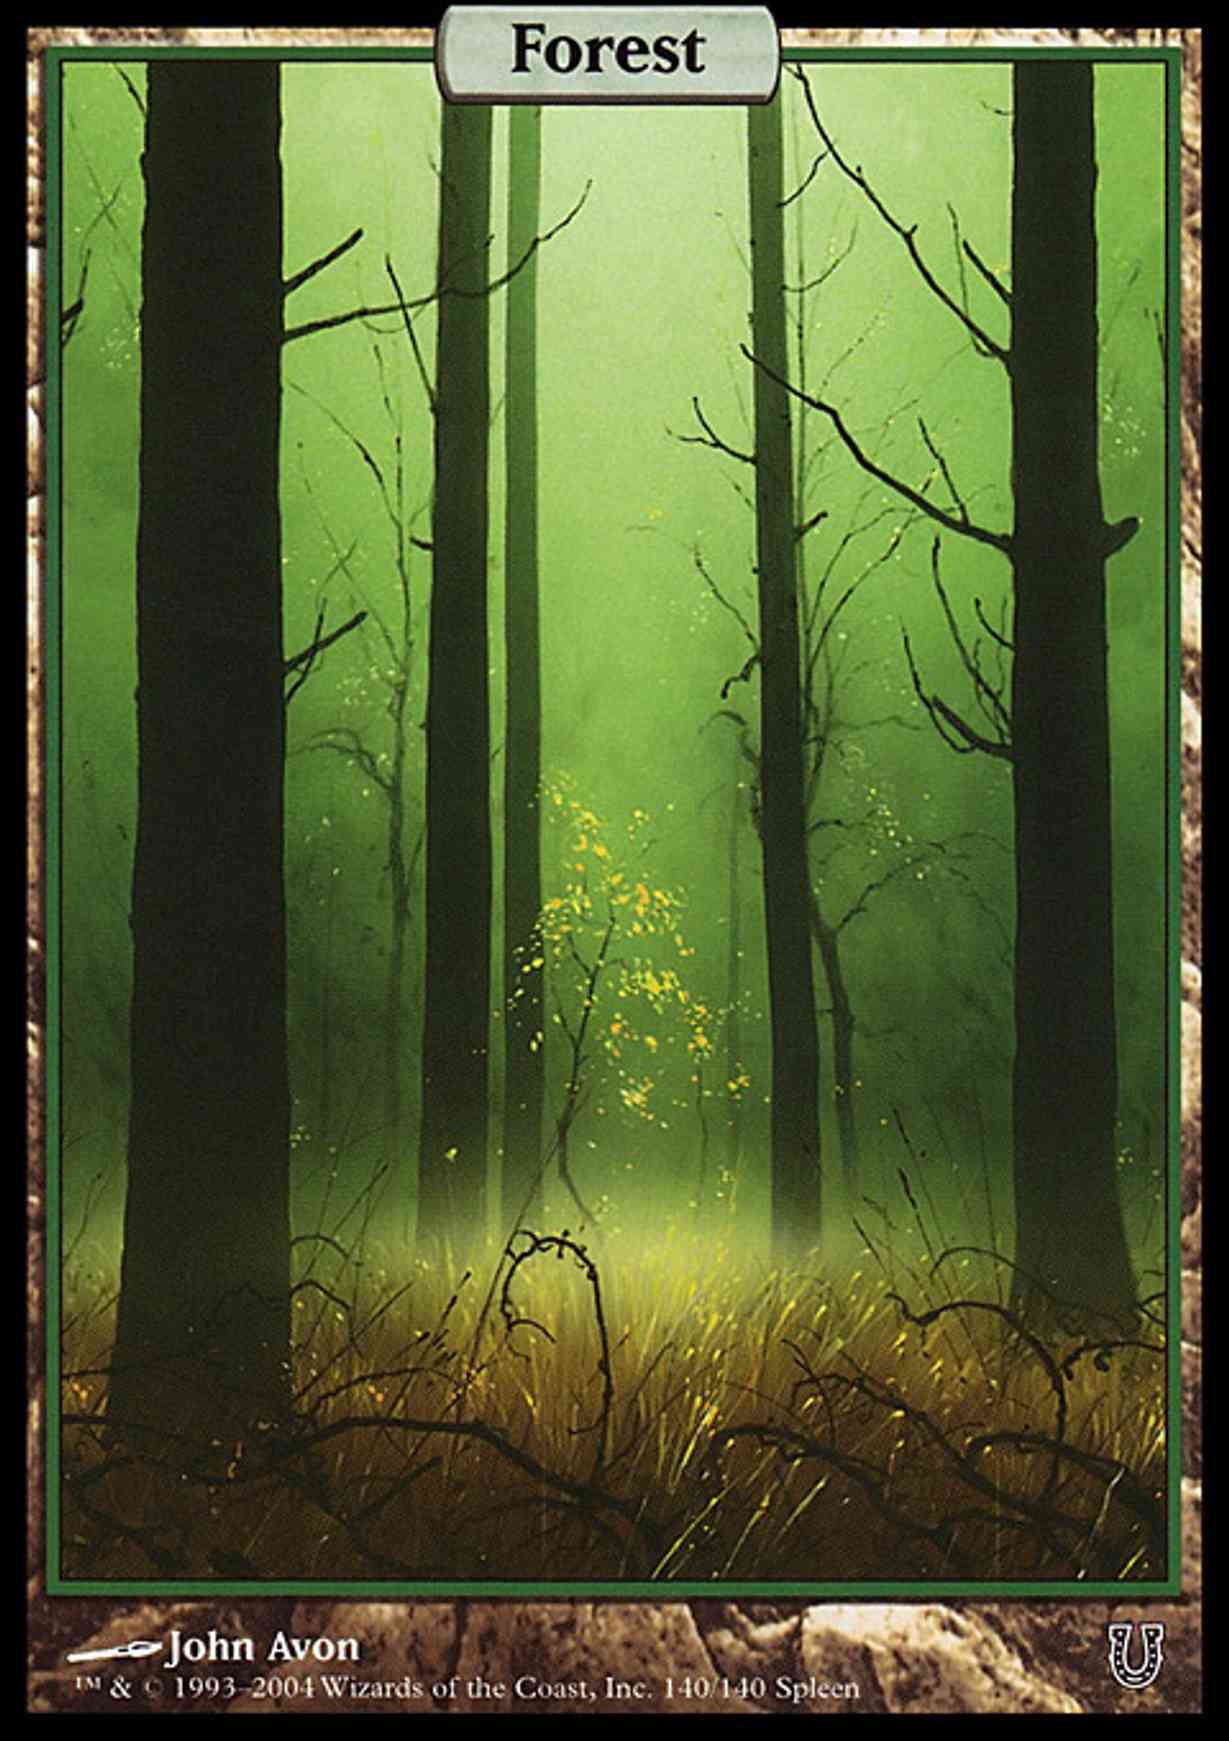 Forest - Full Art magic card front